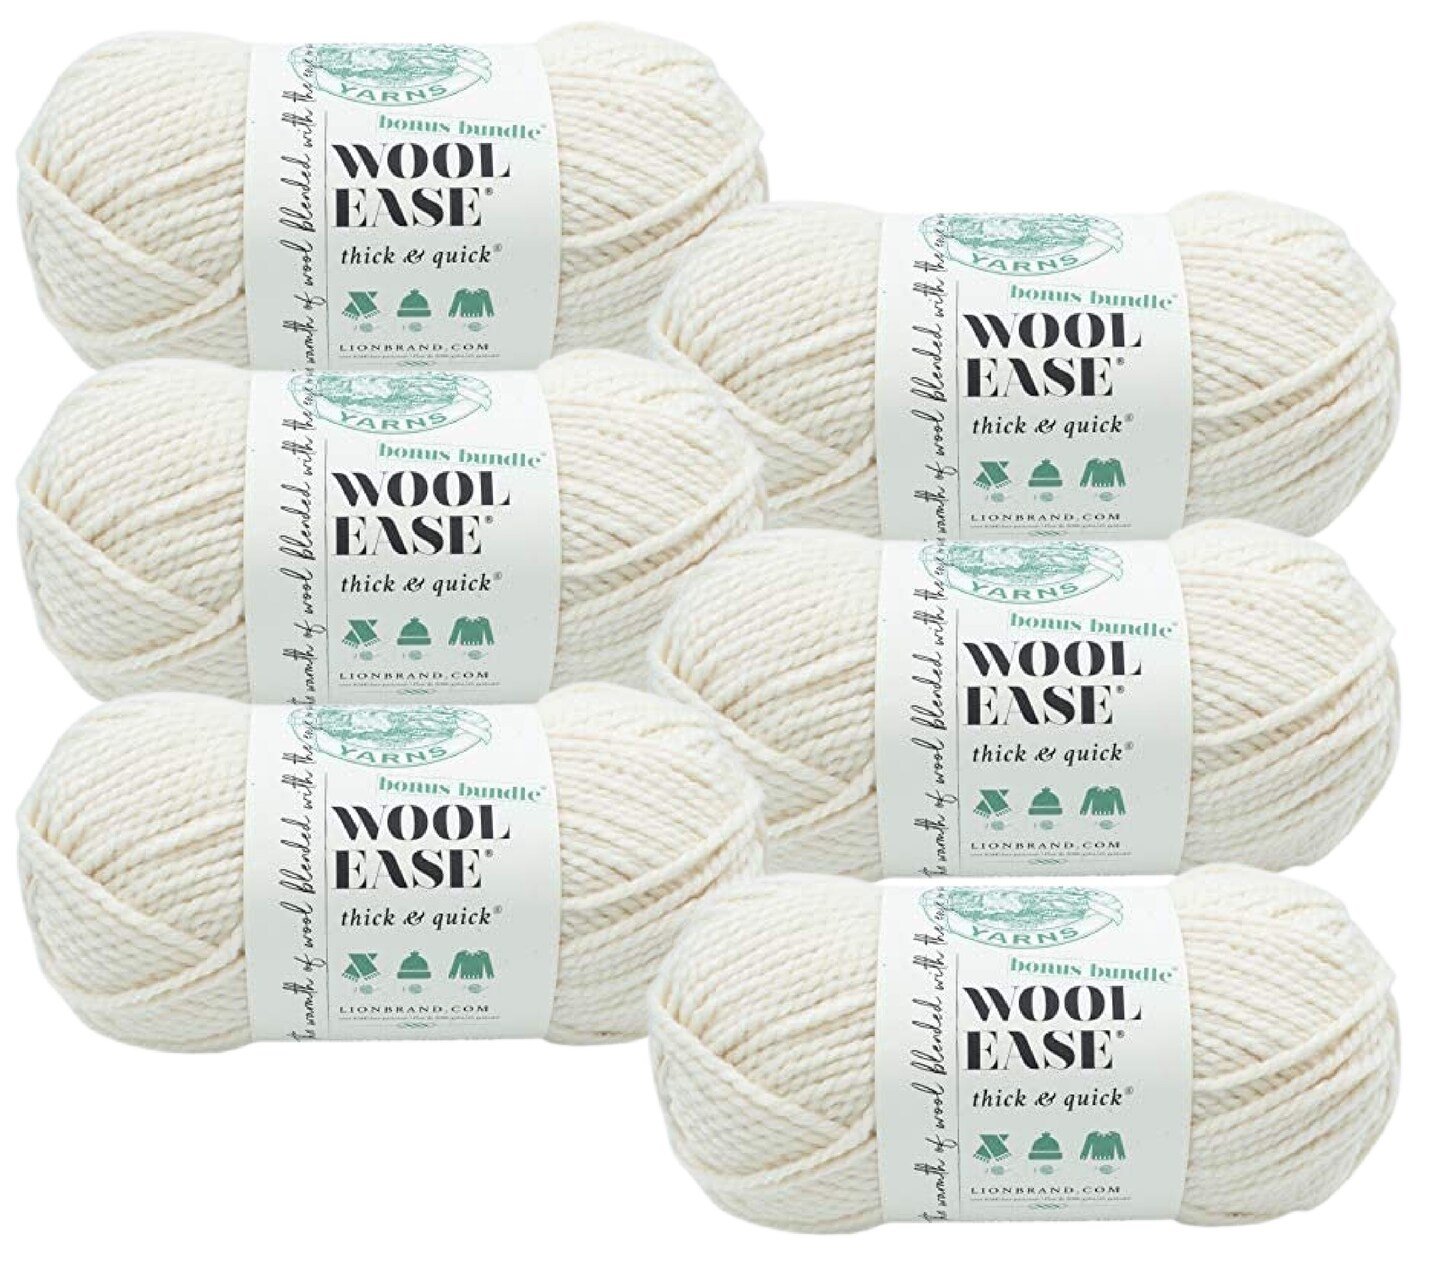 Lion Brand Wool-Ease Thick and Quick Yarn - 6 Pack (Fisherman